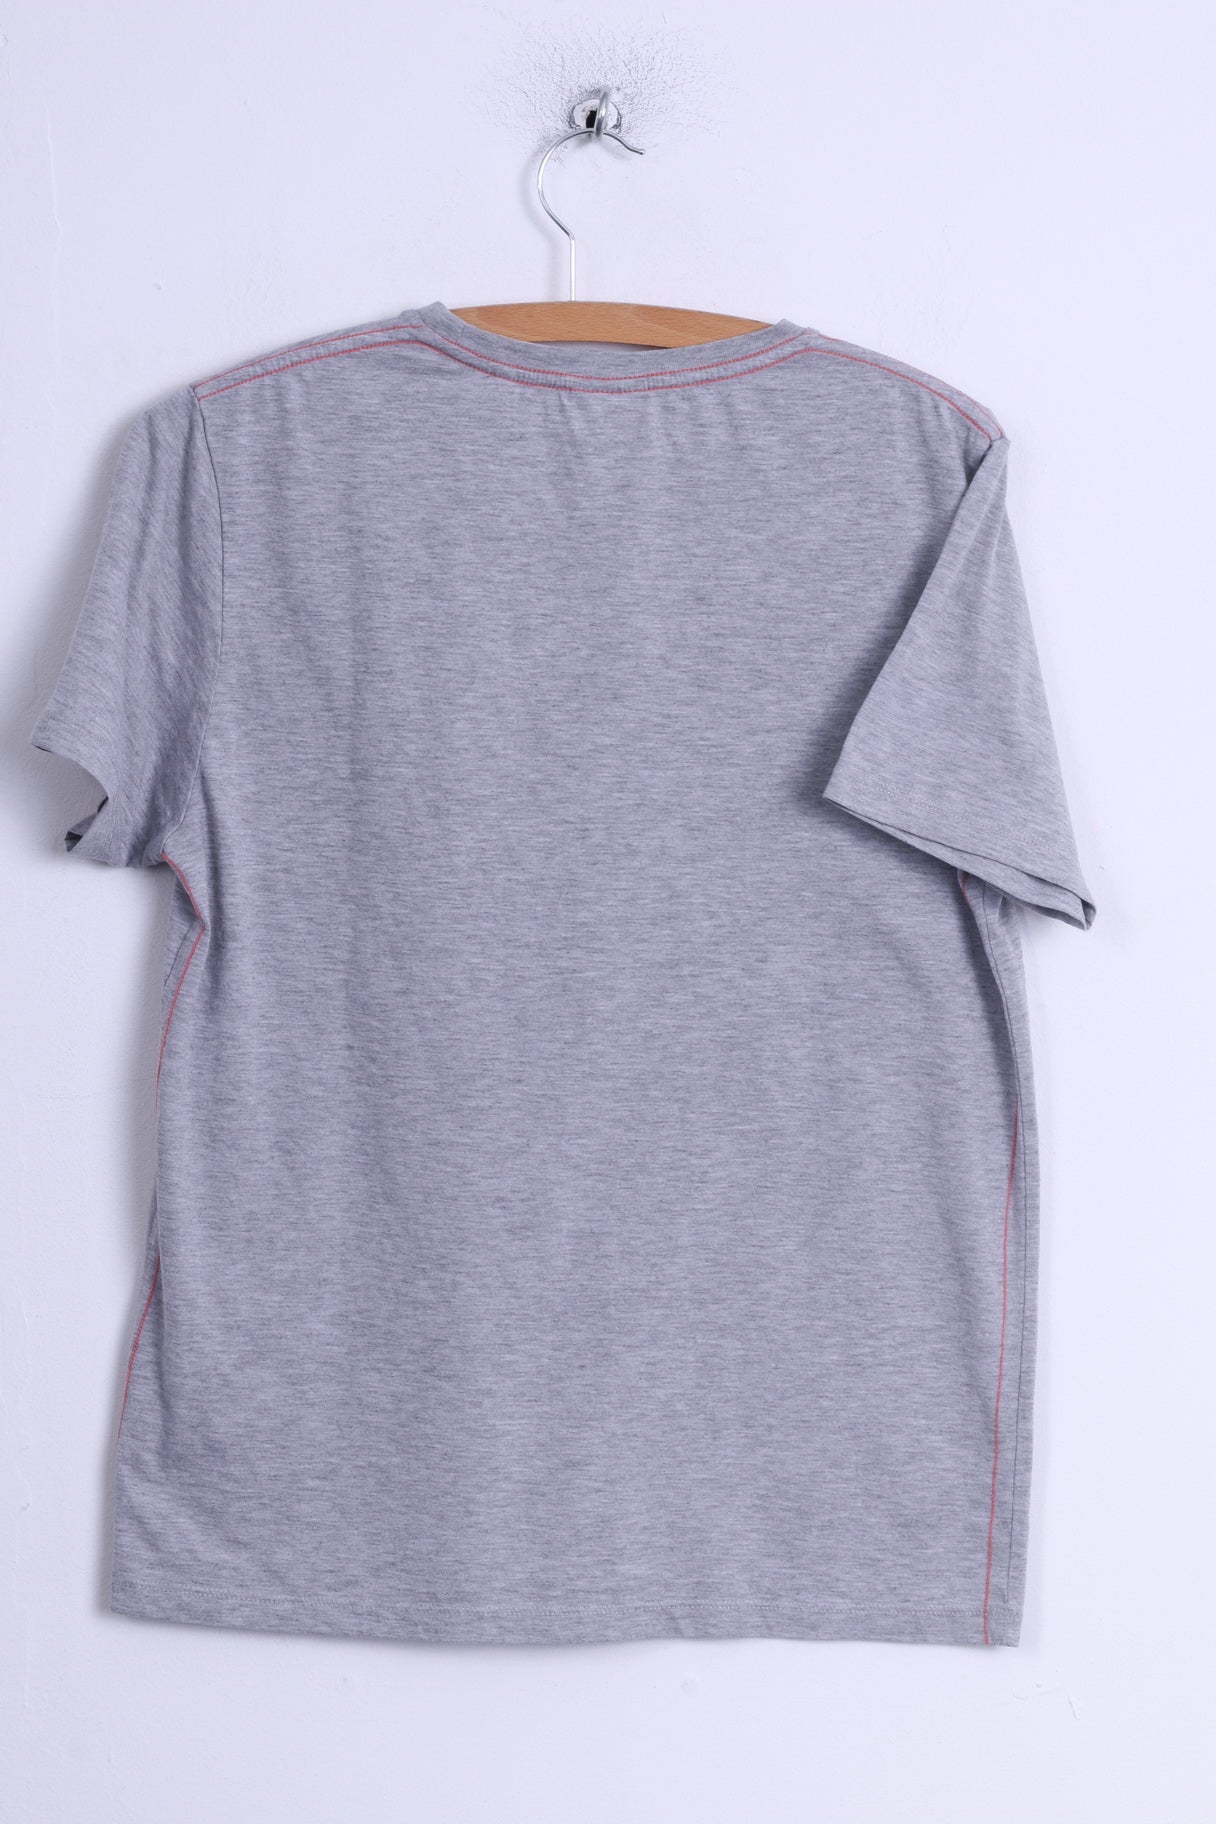 Next Mens M (S) T-Shirt Grey Cotton Graphic 7 Up Seven Up Drink